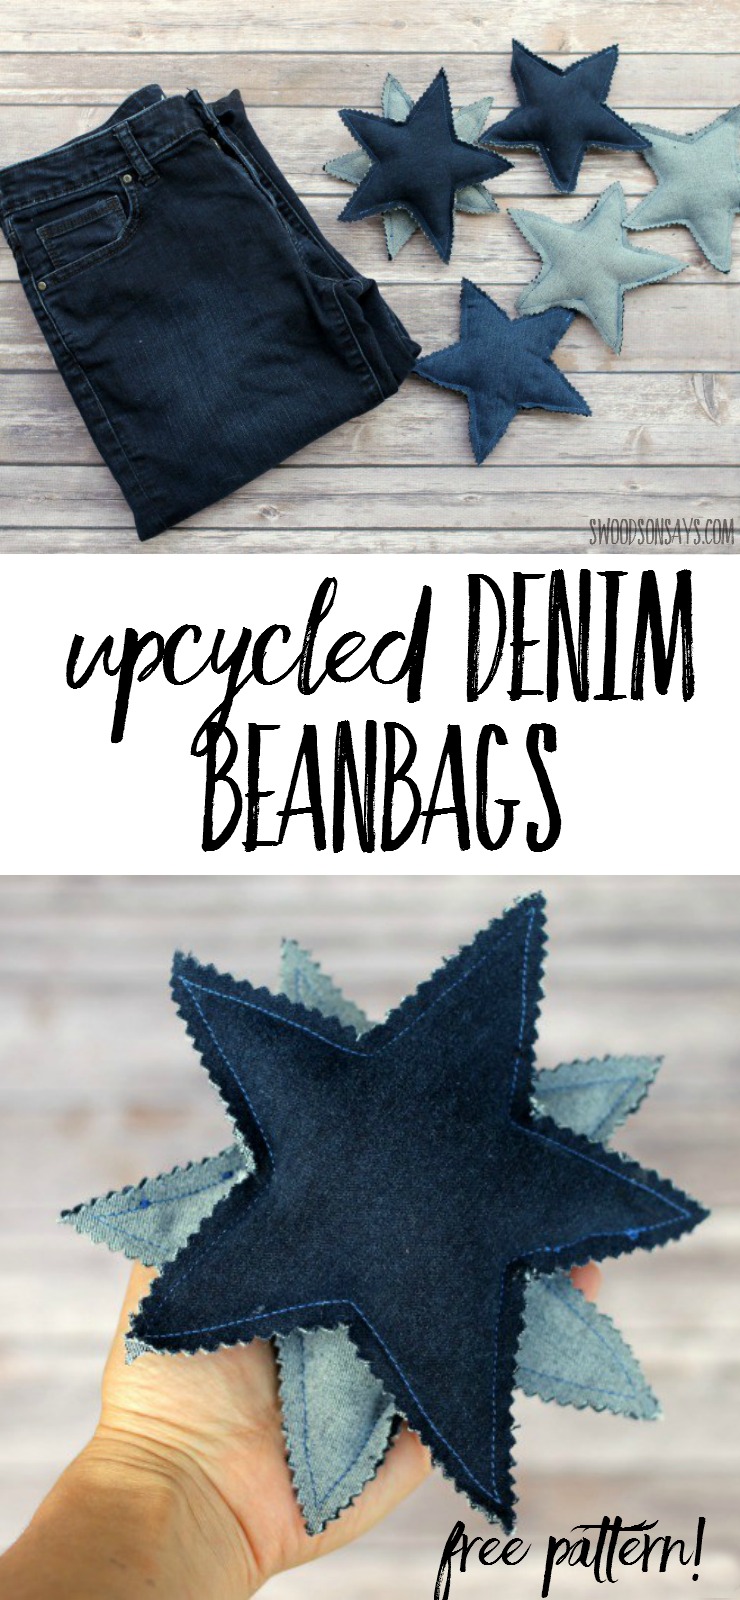 Use this easy upcycling tutorial to make denim beanbags! Stars are fun to catch and easy to throw - upcycled bluejean toy ideas are a great handmade toy. My kids love playing with these!